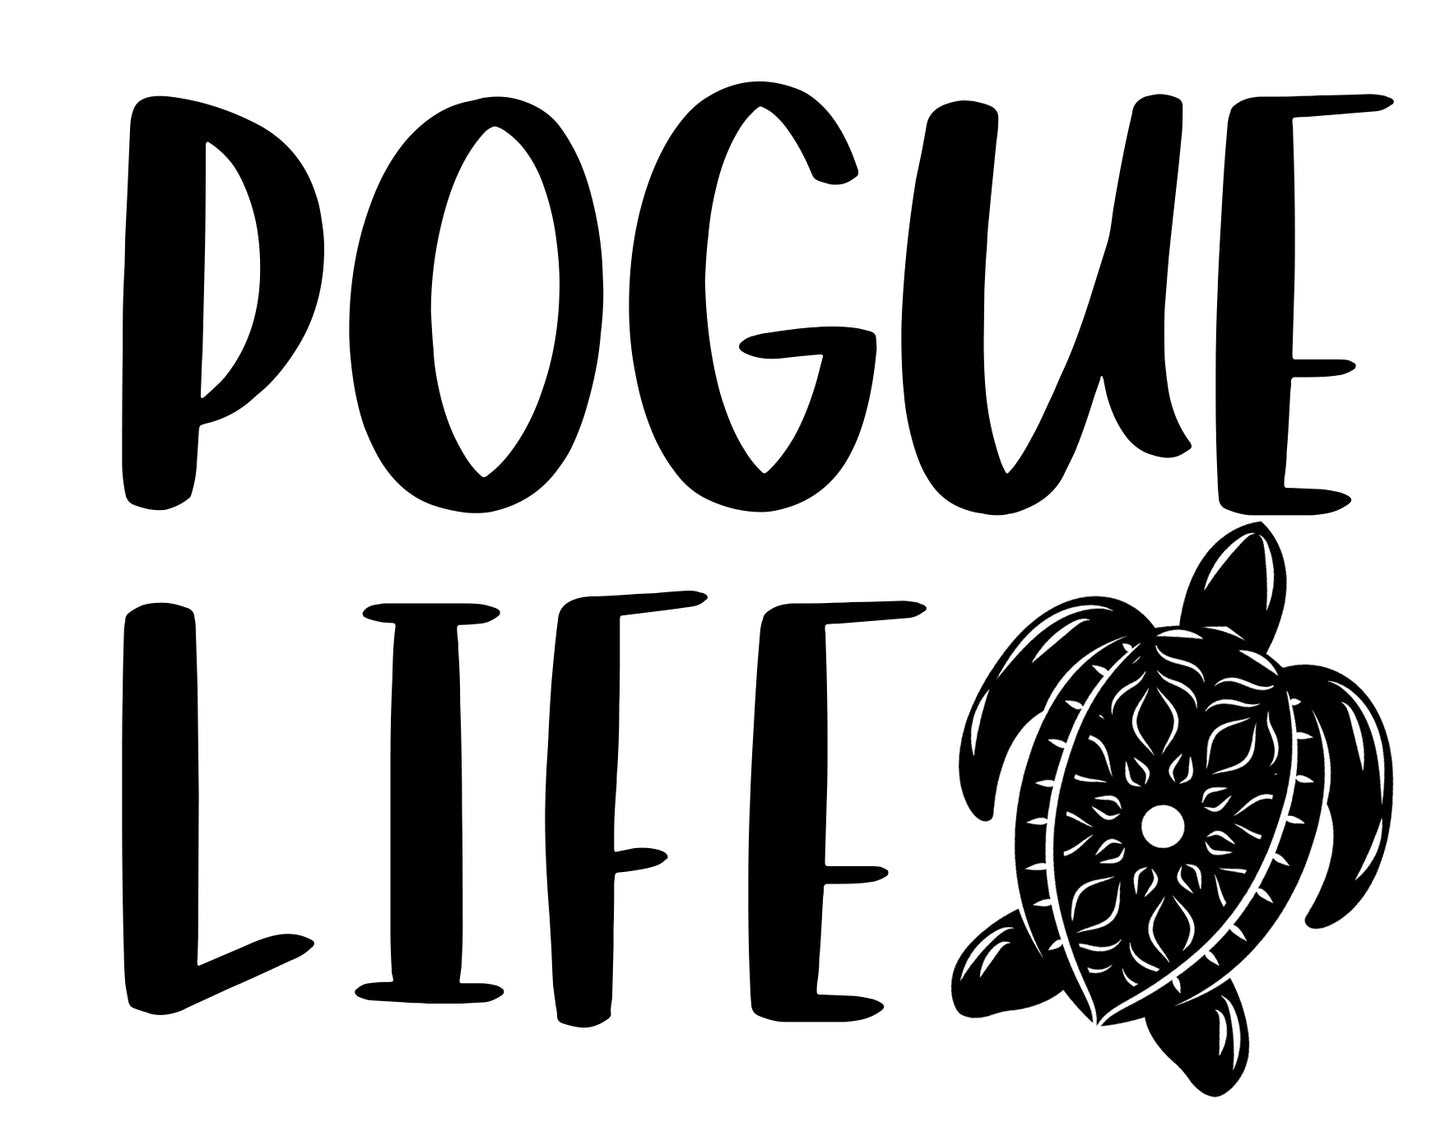 Pogue Life Turtle Tee - In Grey & White